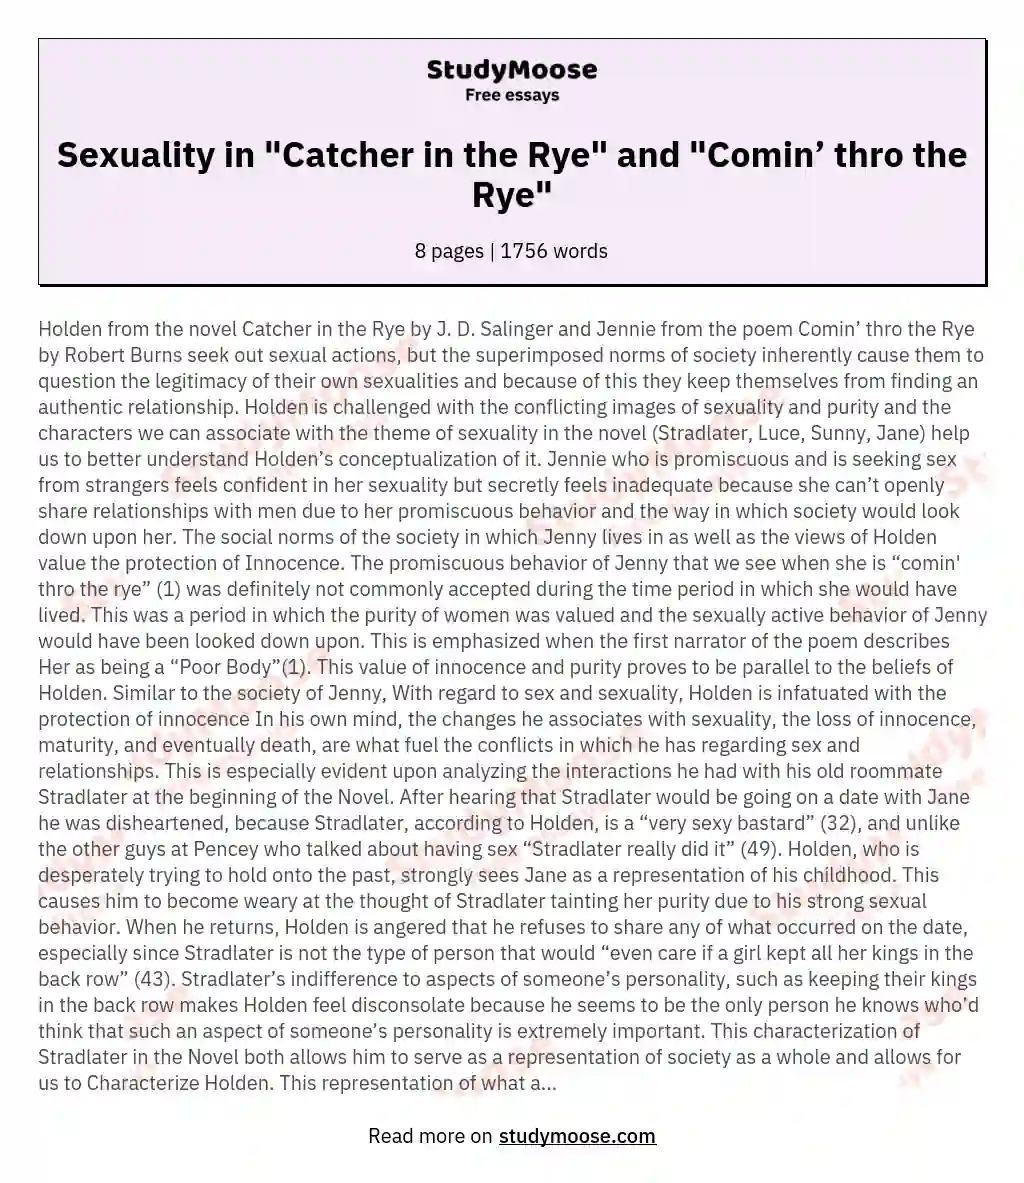 Sexuality in "Catcher in the Rye" and "Comin’ thro the Rye"